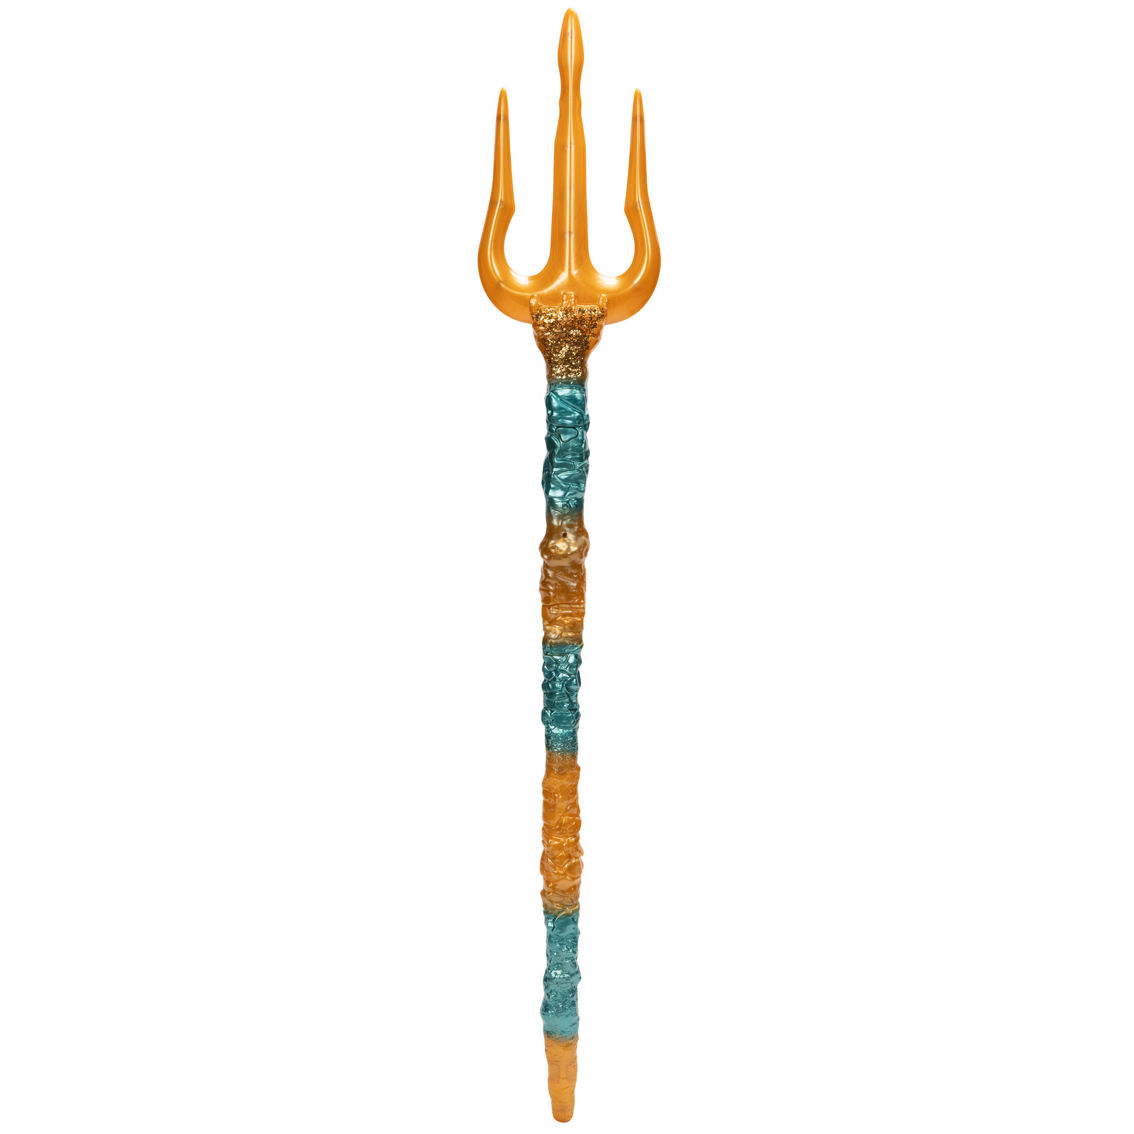 Disney Little Mermaid Live Action King Triton's Feature Trident - Image 2 of 3